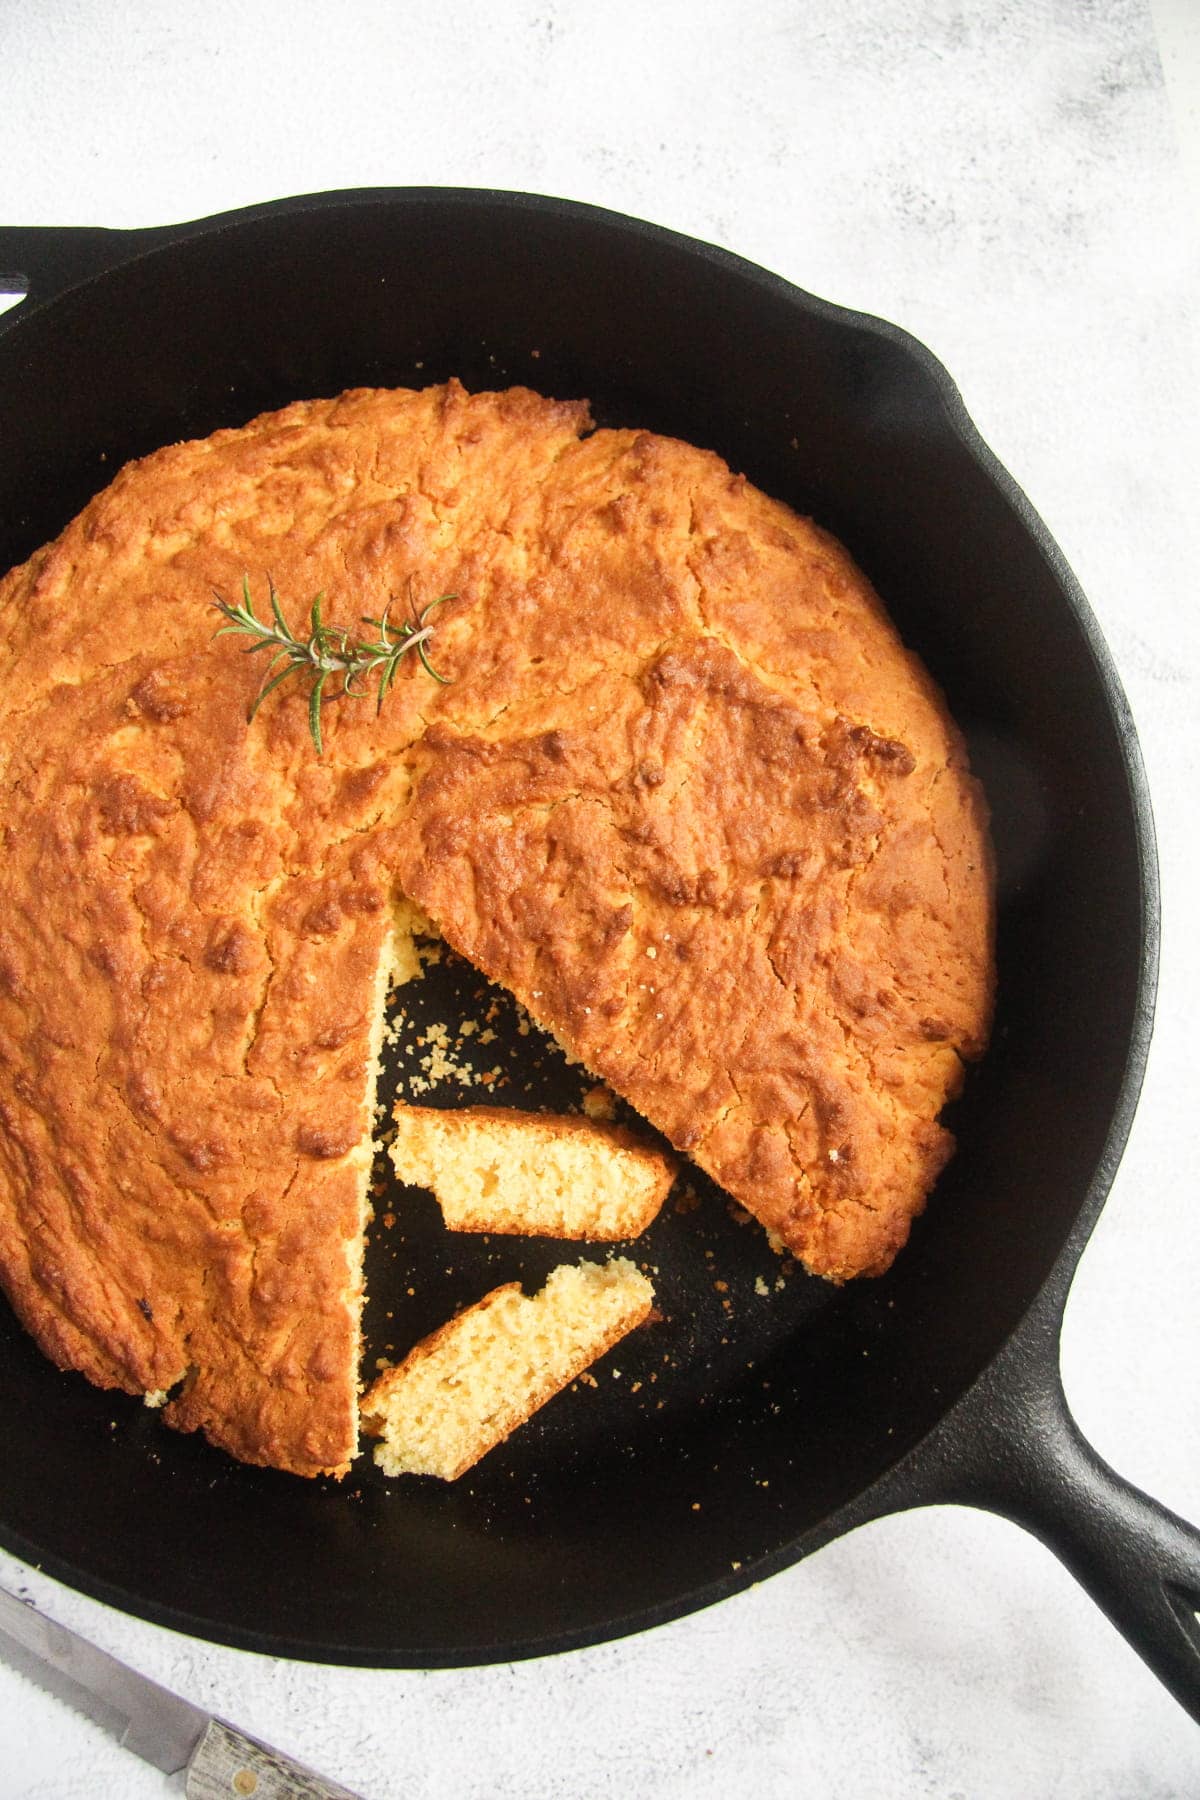 cast iron pan with golden brown cornbread in it.